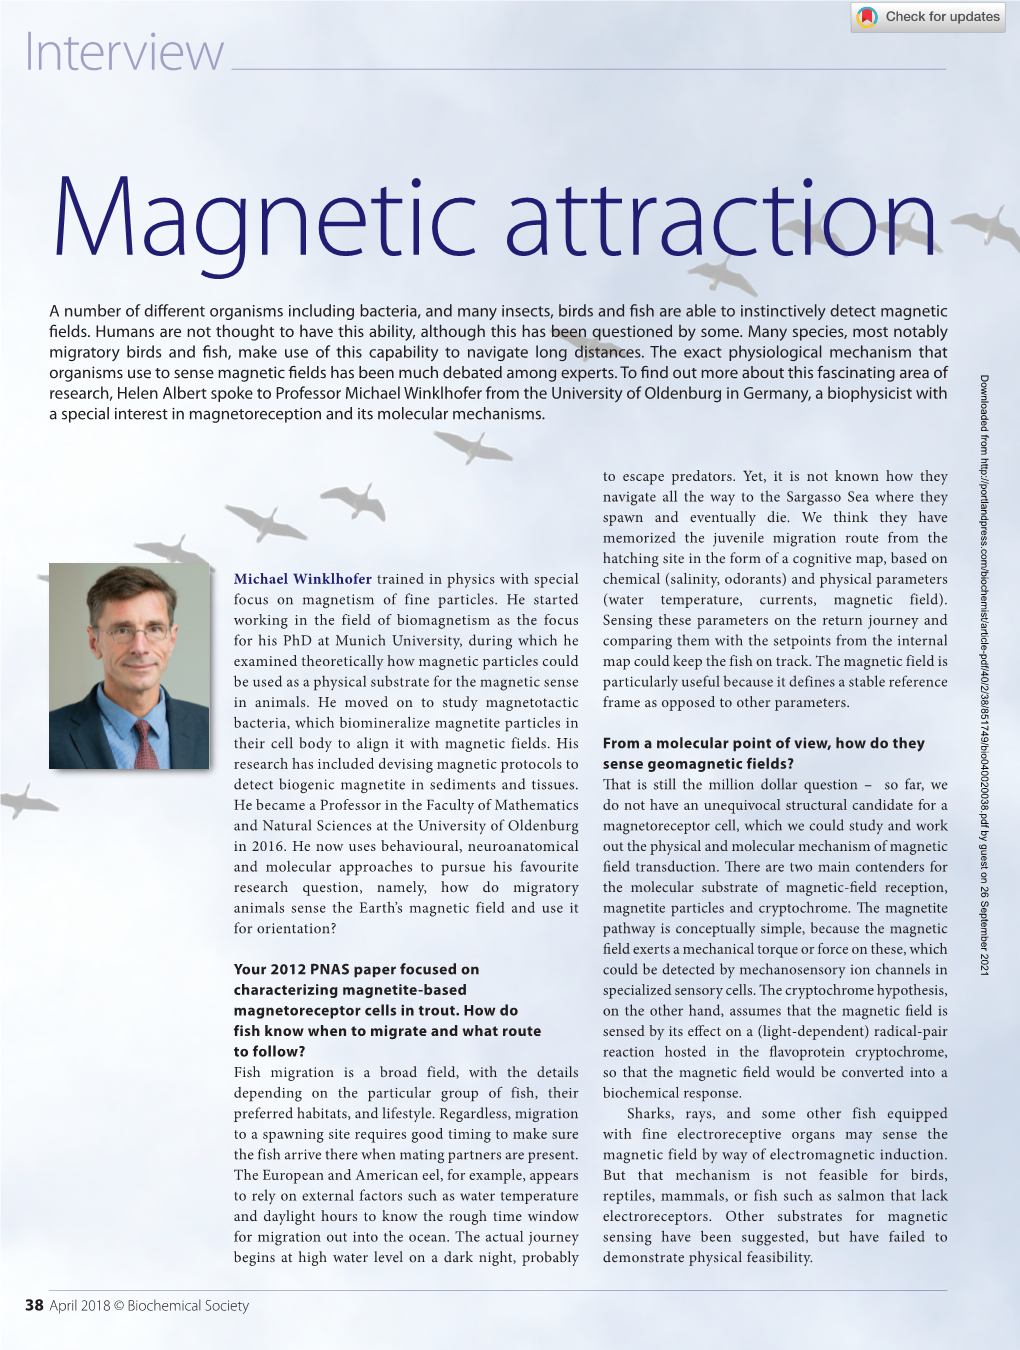 Magnetic Attraction